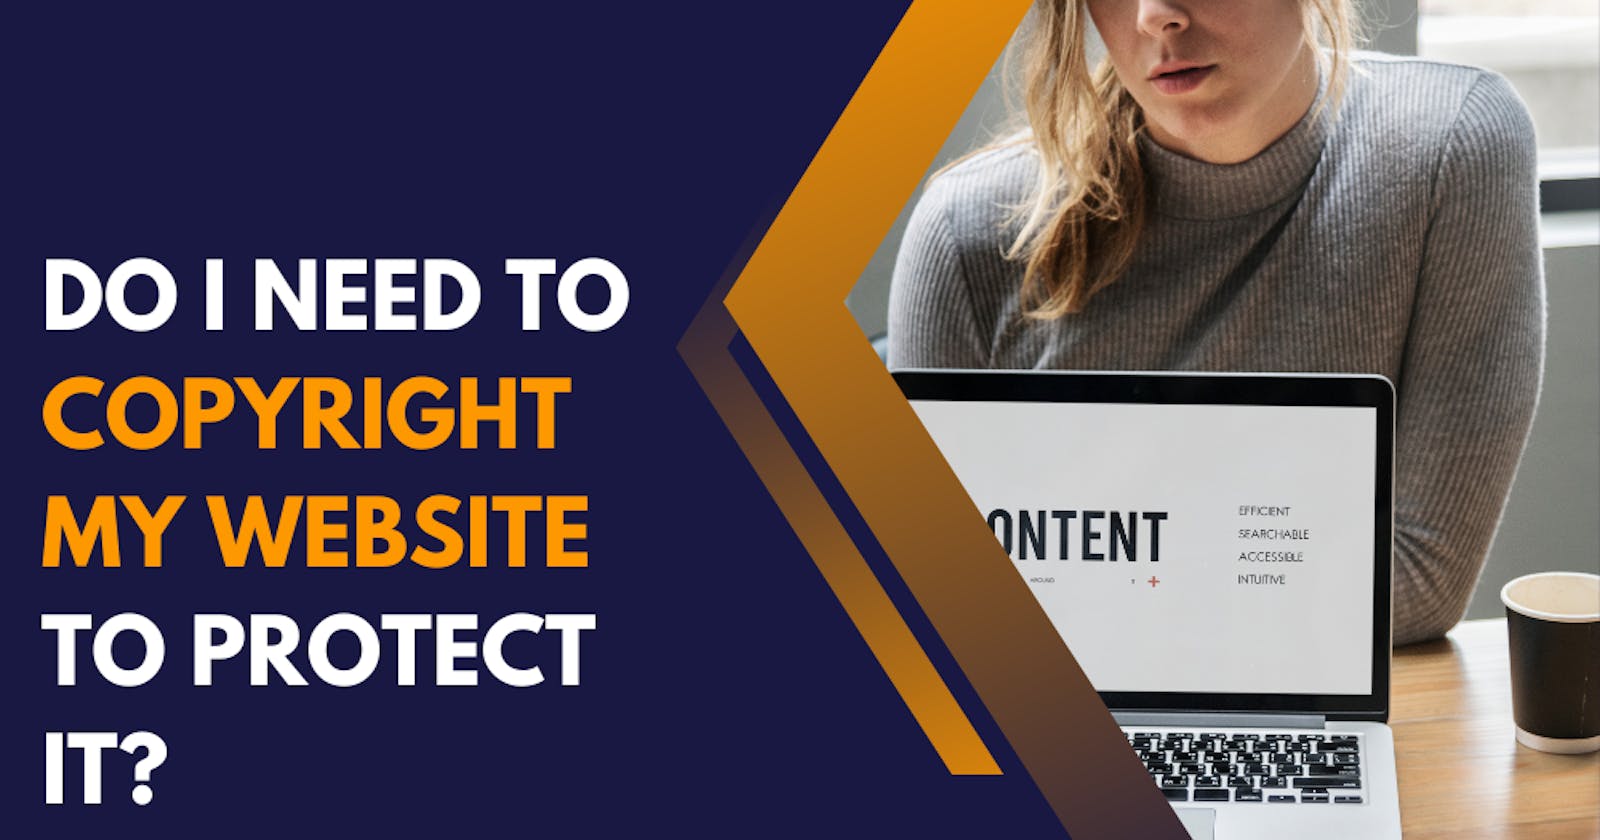 Do I Need To Copyright My Website To Protect It?